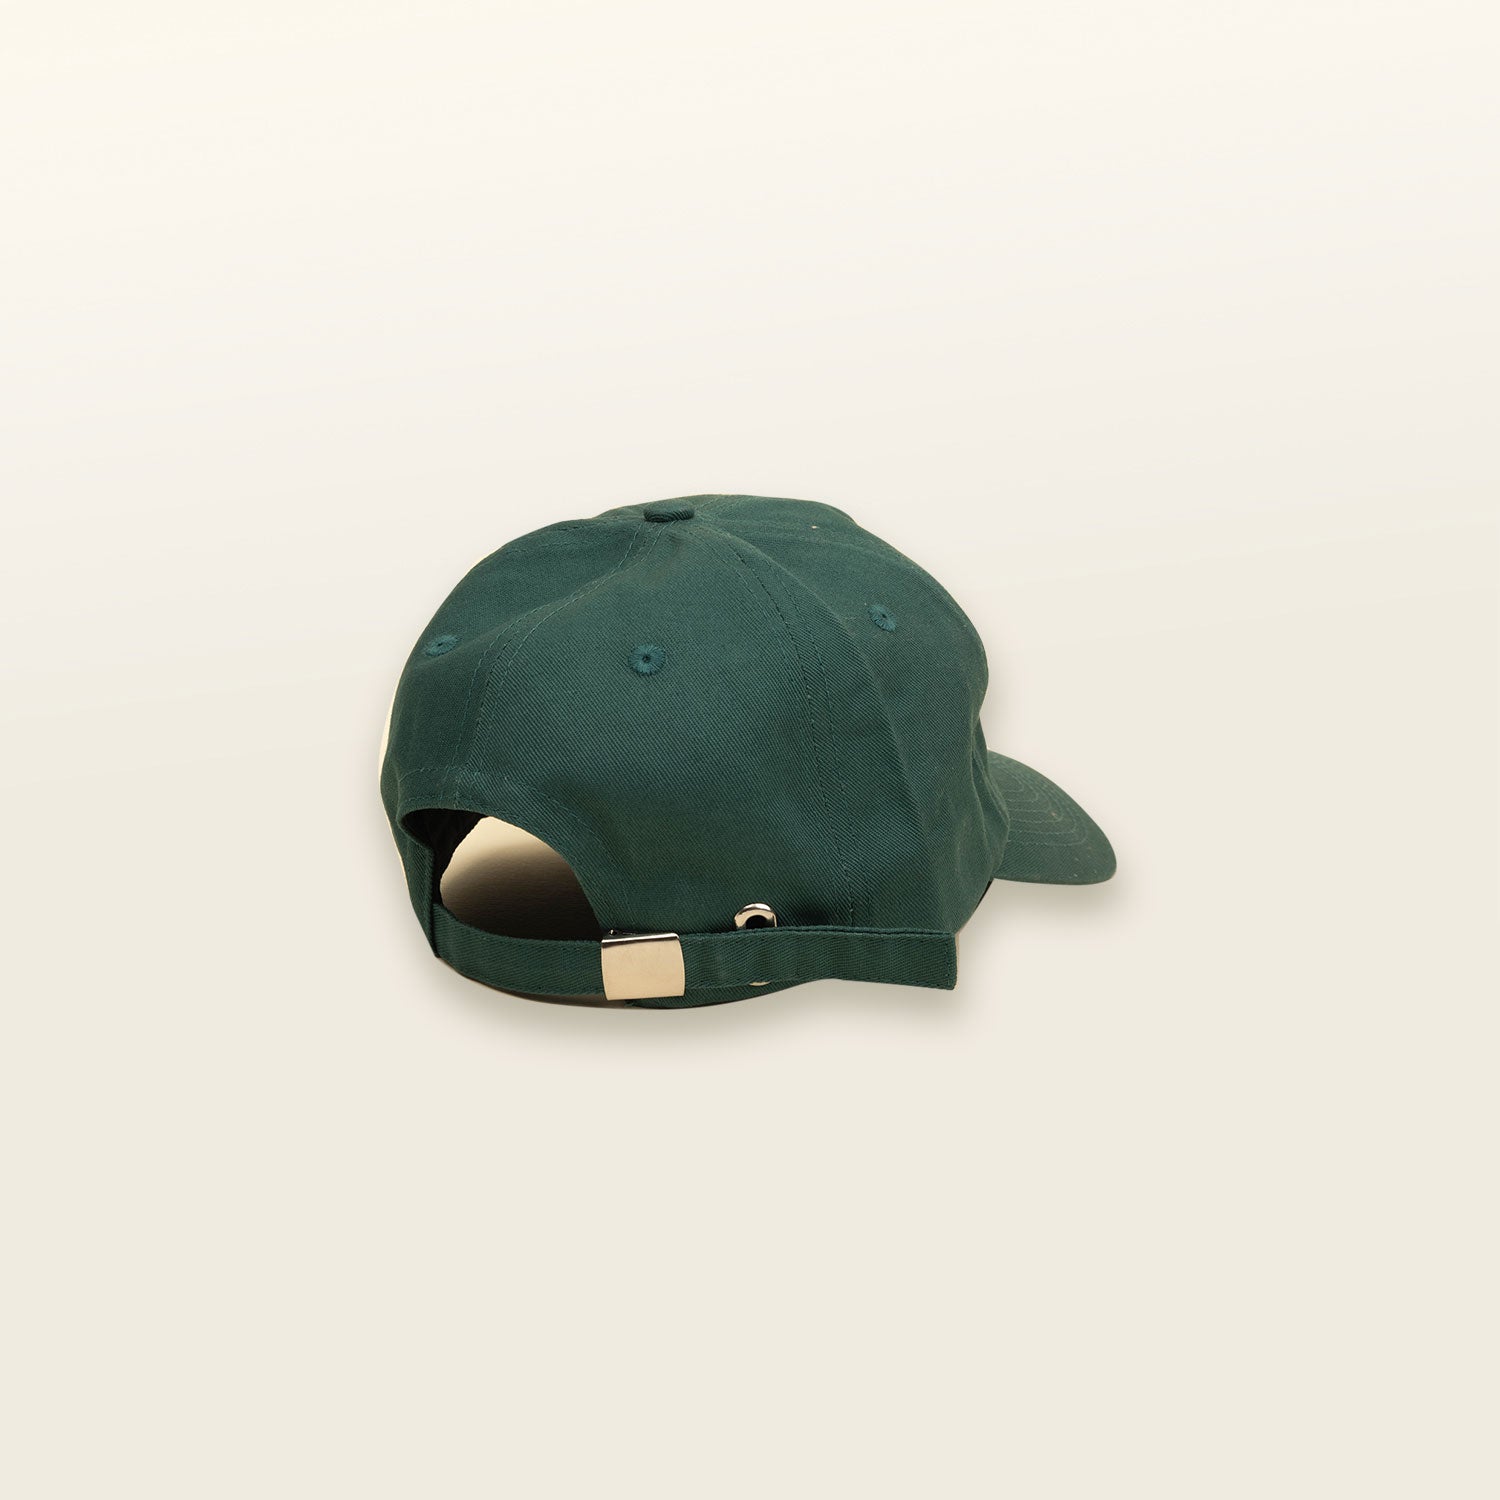 The Aiori Hat is a quality-crafted accessory, designed to make a bold statement with its adjustable back strap and brass clasp for a luxuriously comfortable, custom fit. 100% cotton construction ensures long-lasting durability, so you can turn heads in this stylish statement piece wherever you go. #allearsclub